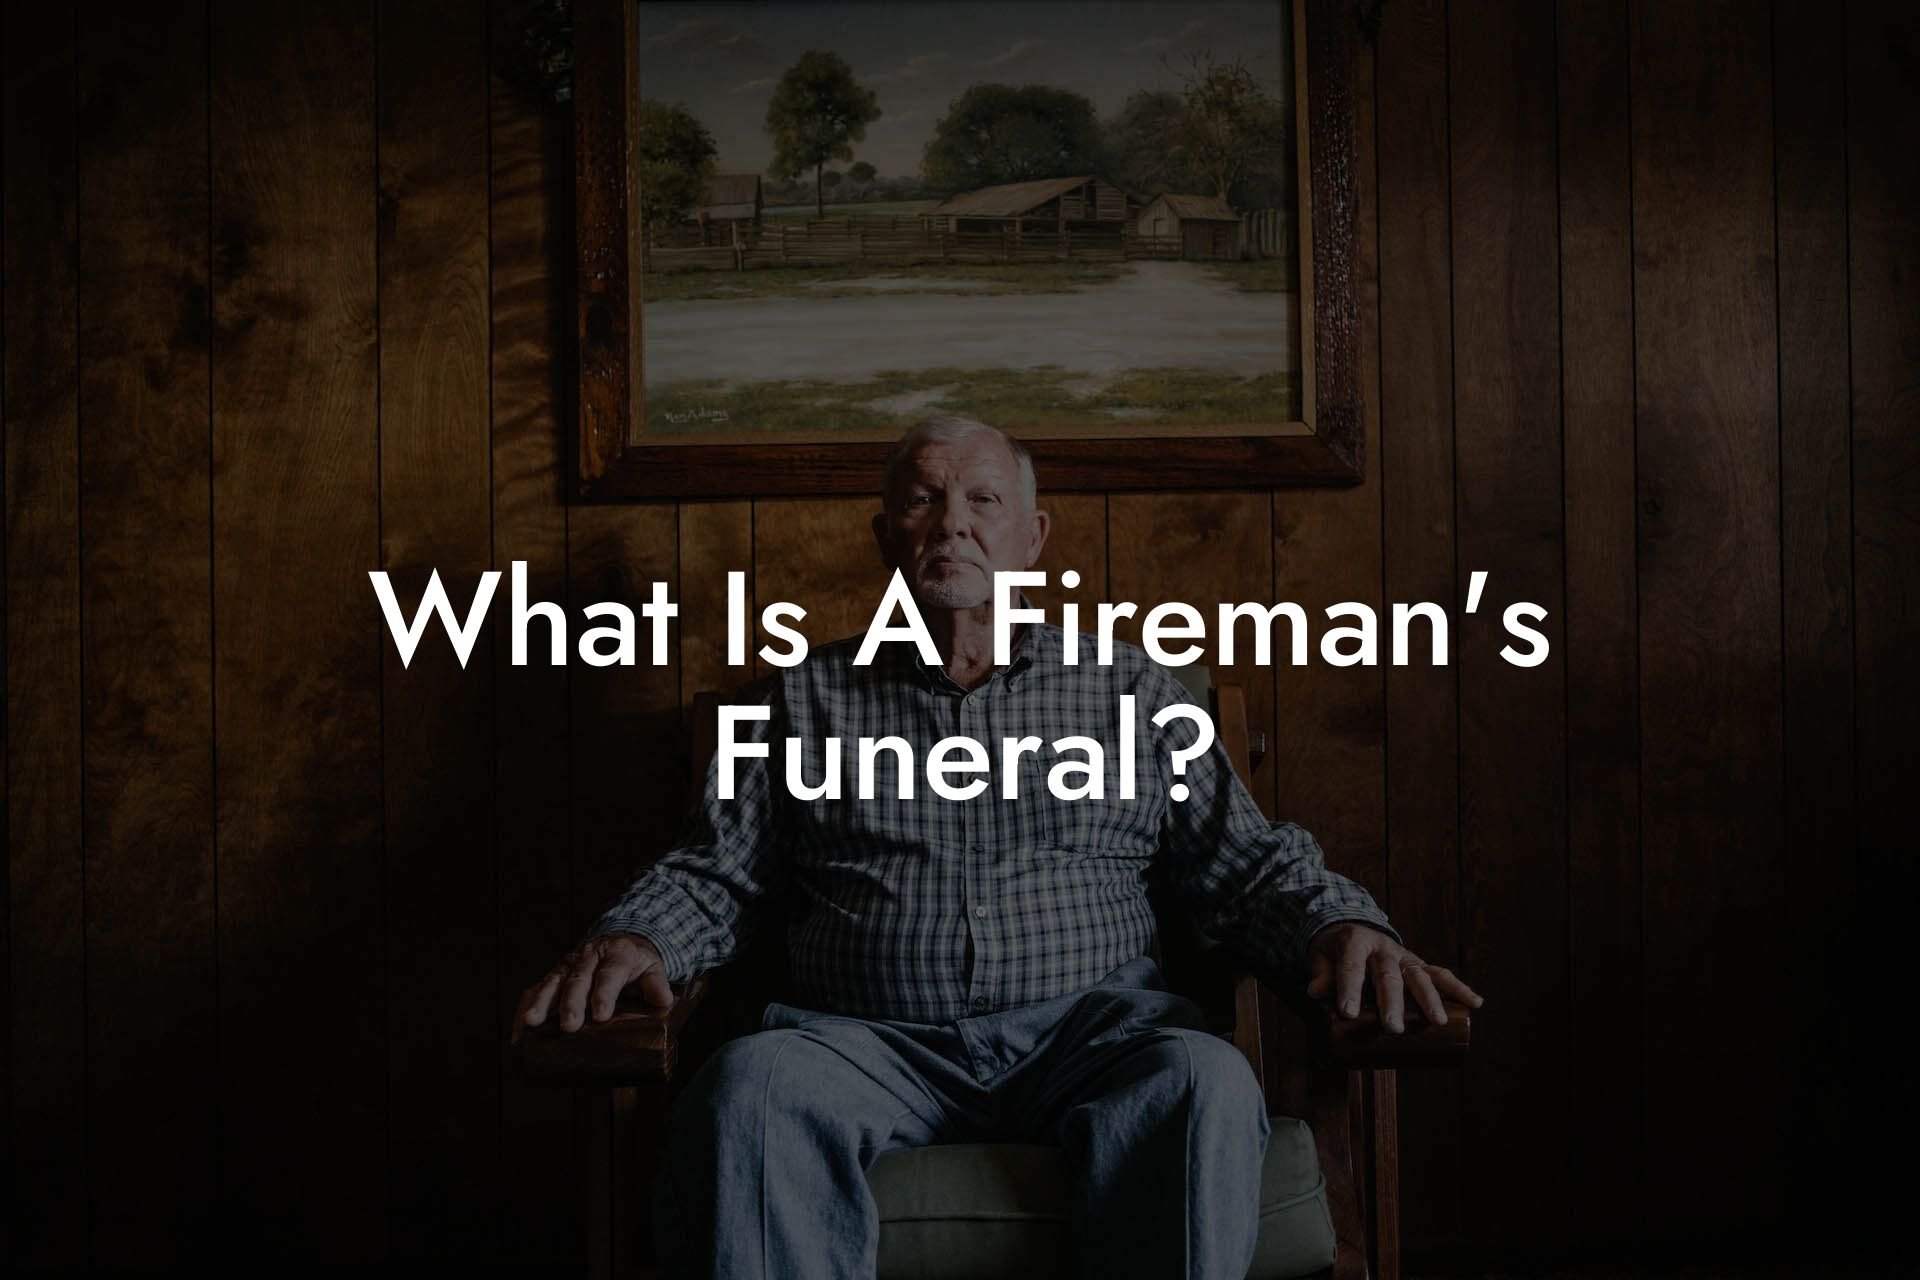 What Is A Fireman's Funeral?